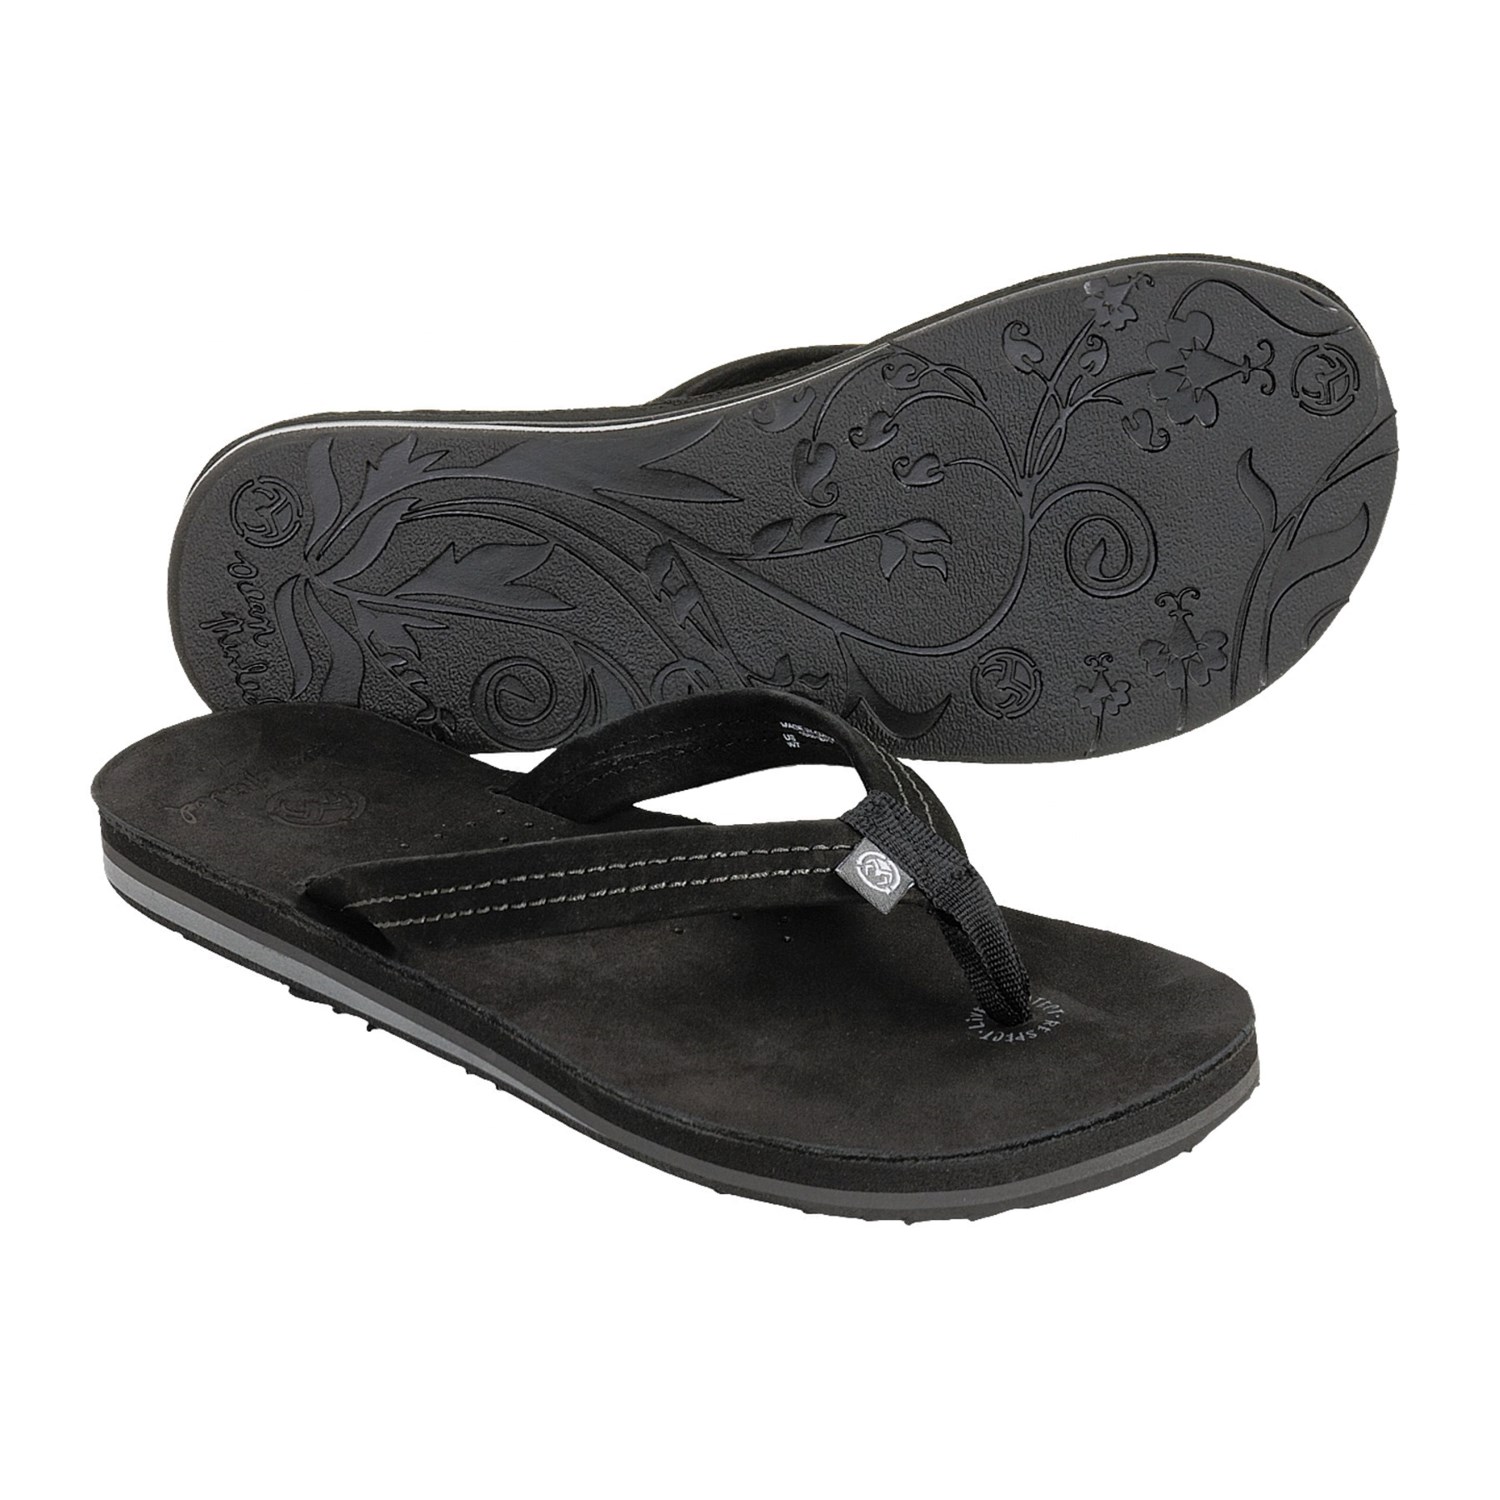 Ocean Minded Moka Sandals (For Women) 3184C - Save 60%